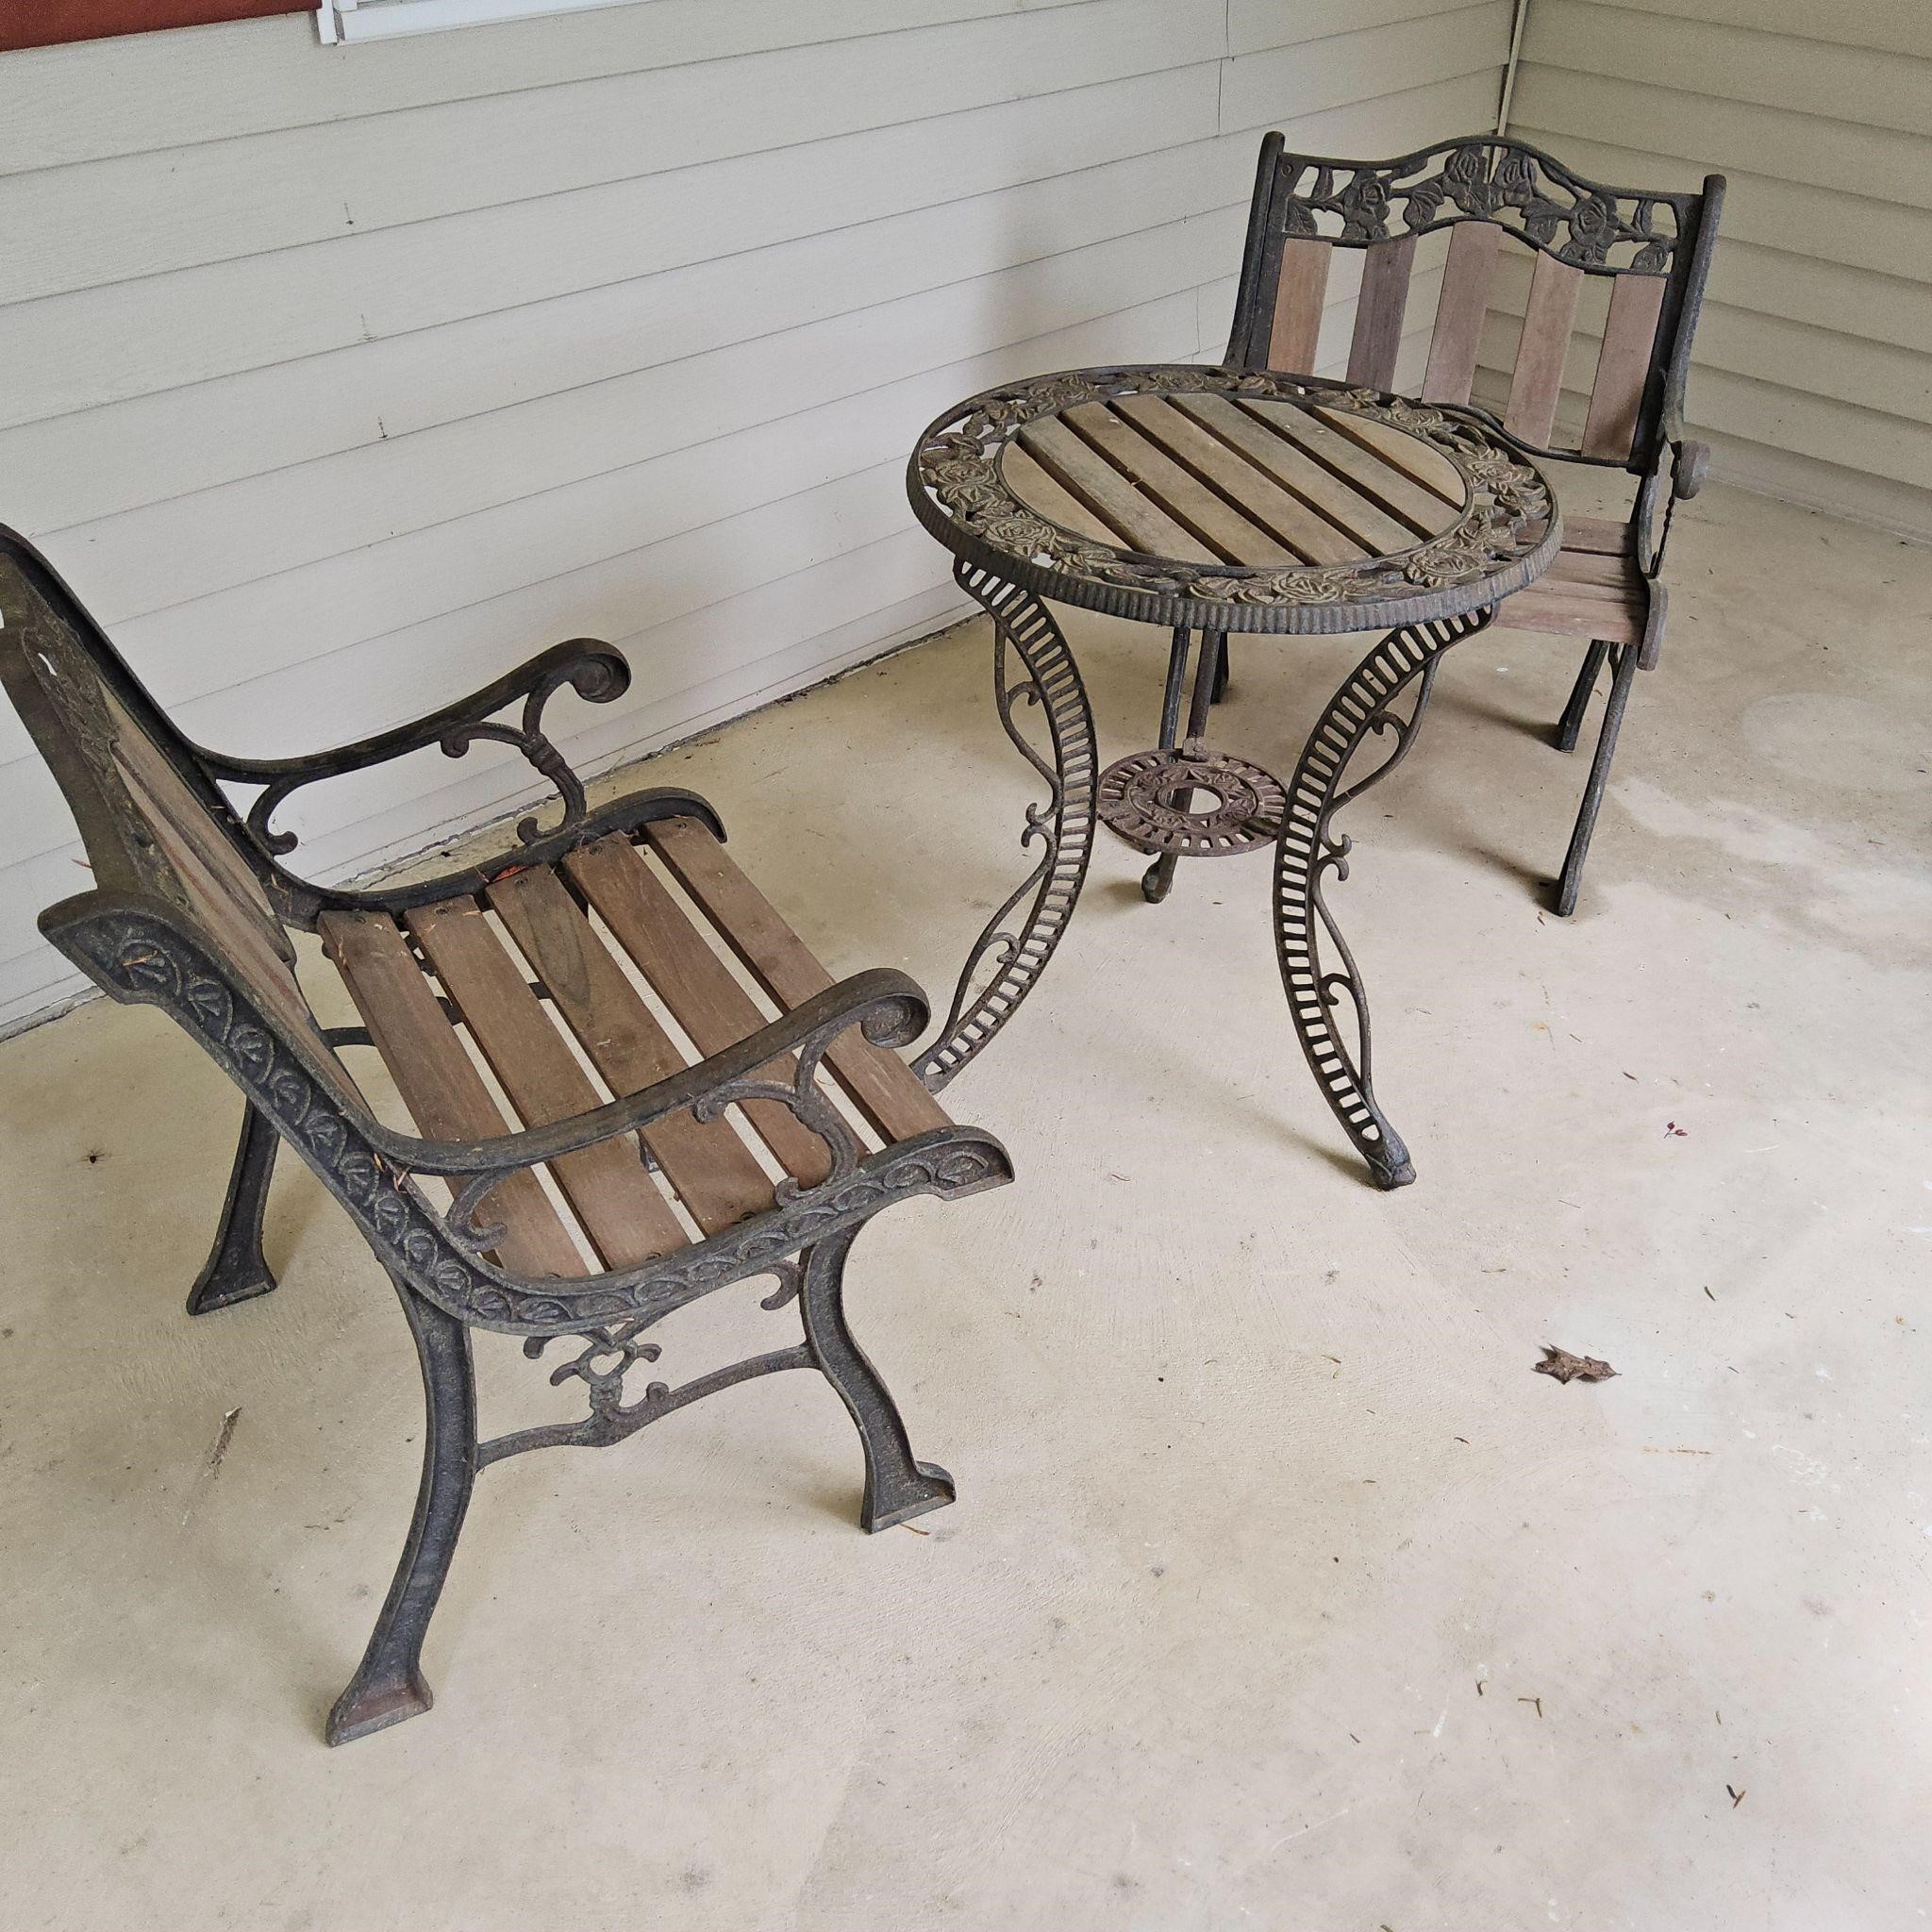 FREDERICKTOWN ONLINE ONLY MOVING AUCTION